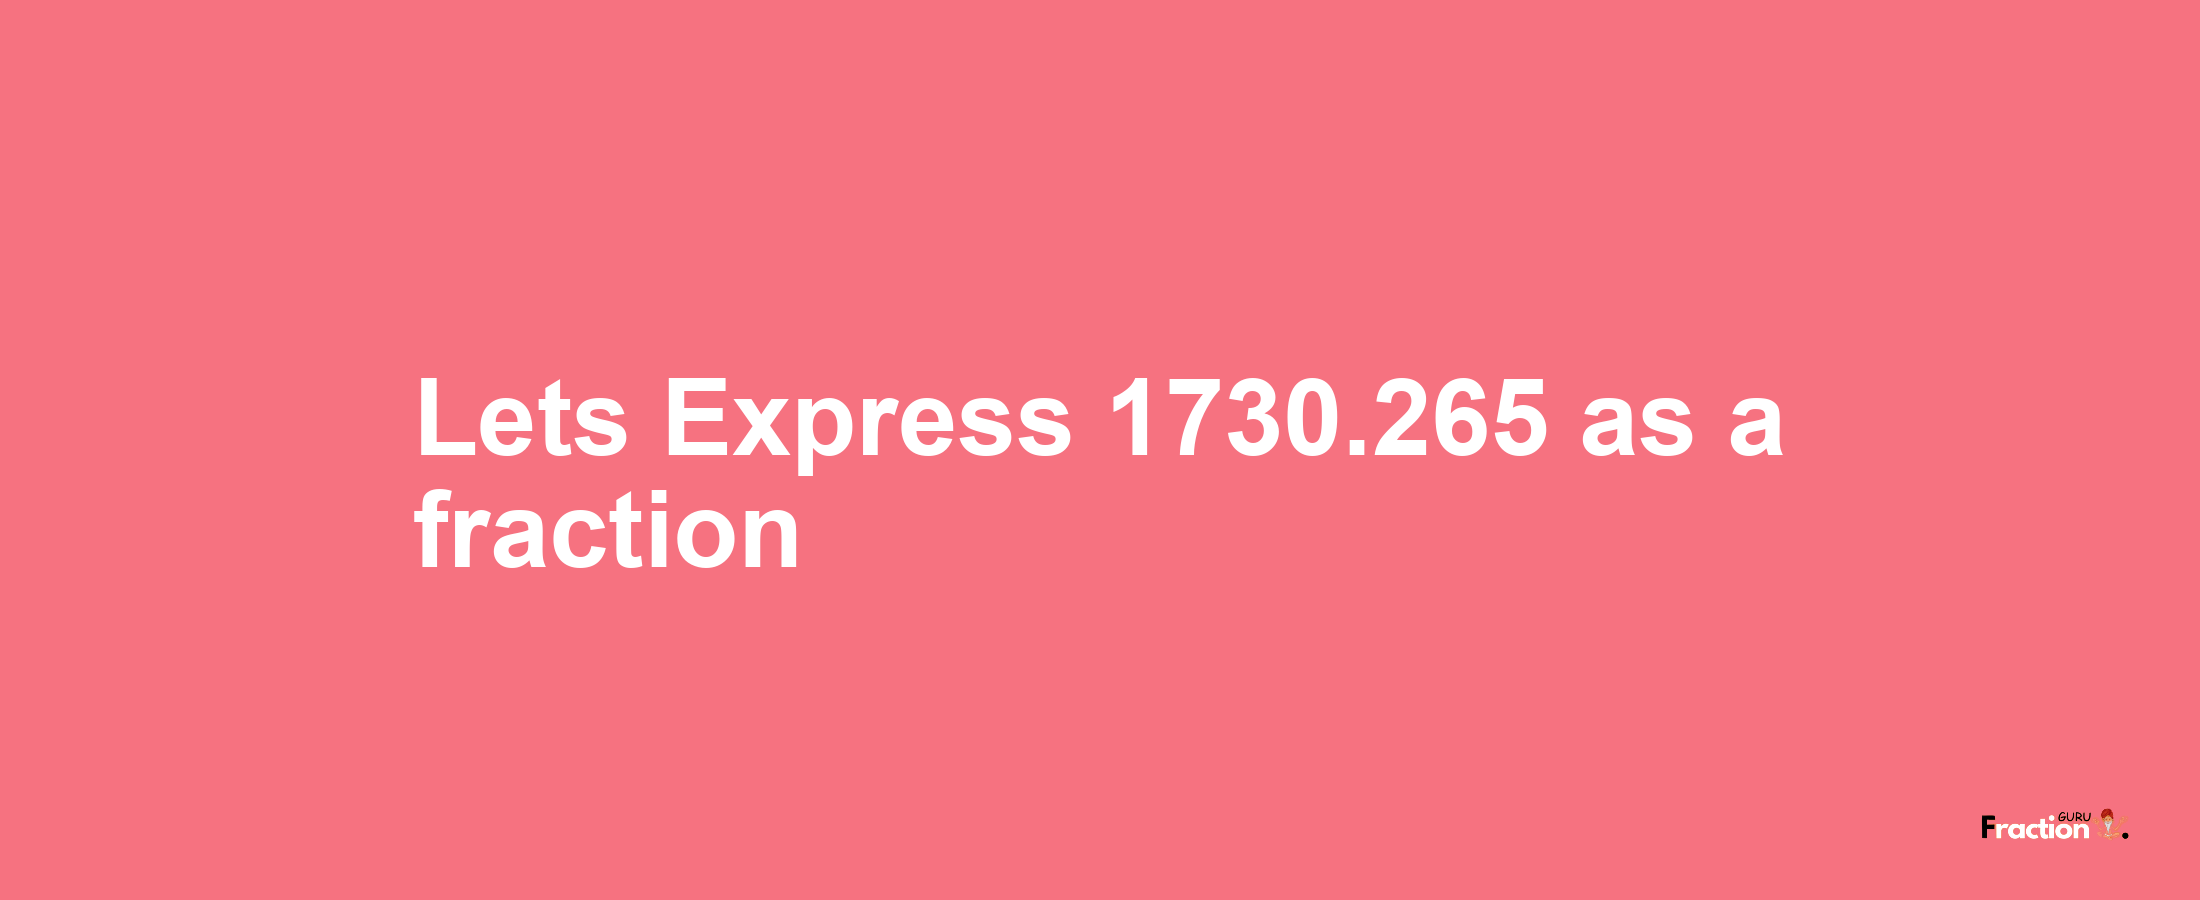 Lets Express 1730.265 as afraction